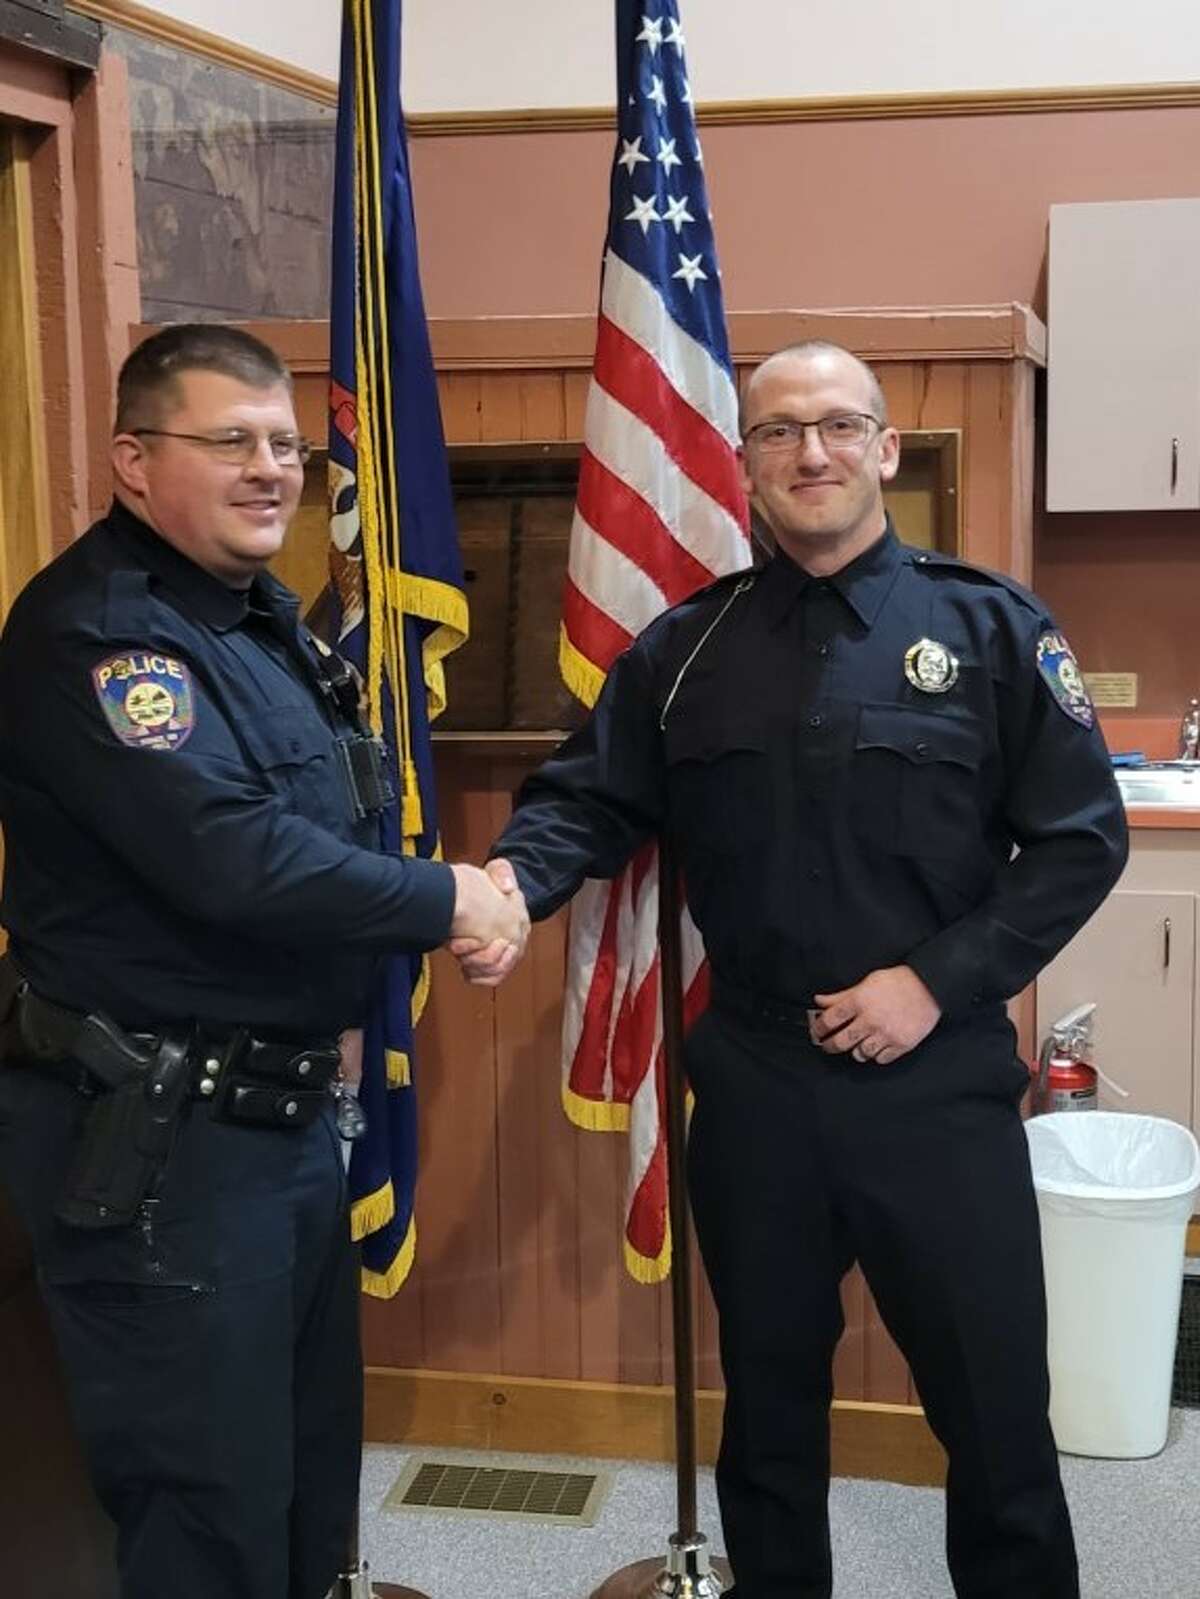 Office Jesse Hyden was sworn in as the newest member of the Evart Police Department during a recent city council meeting.